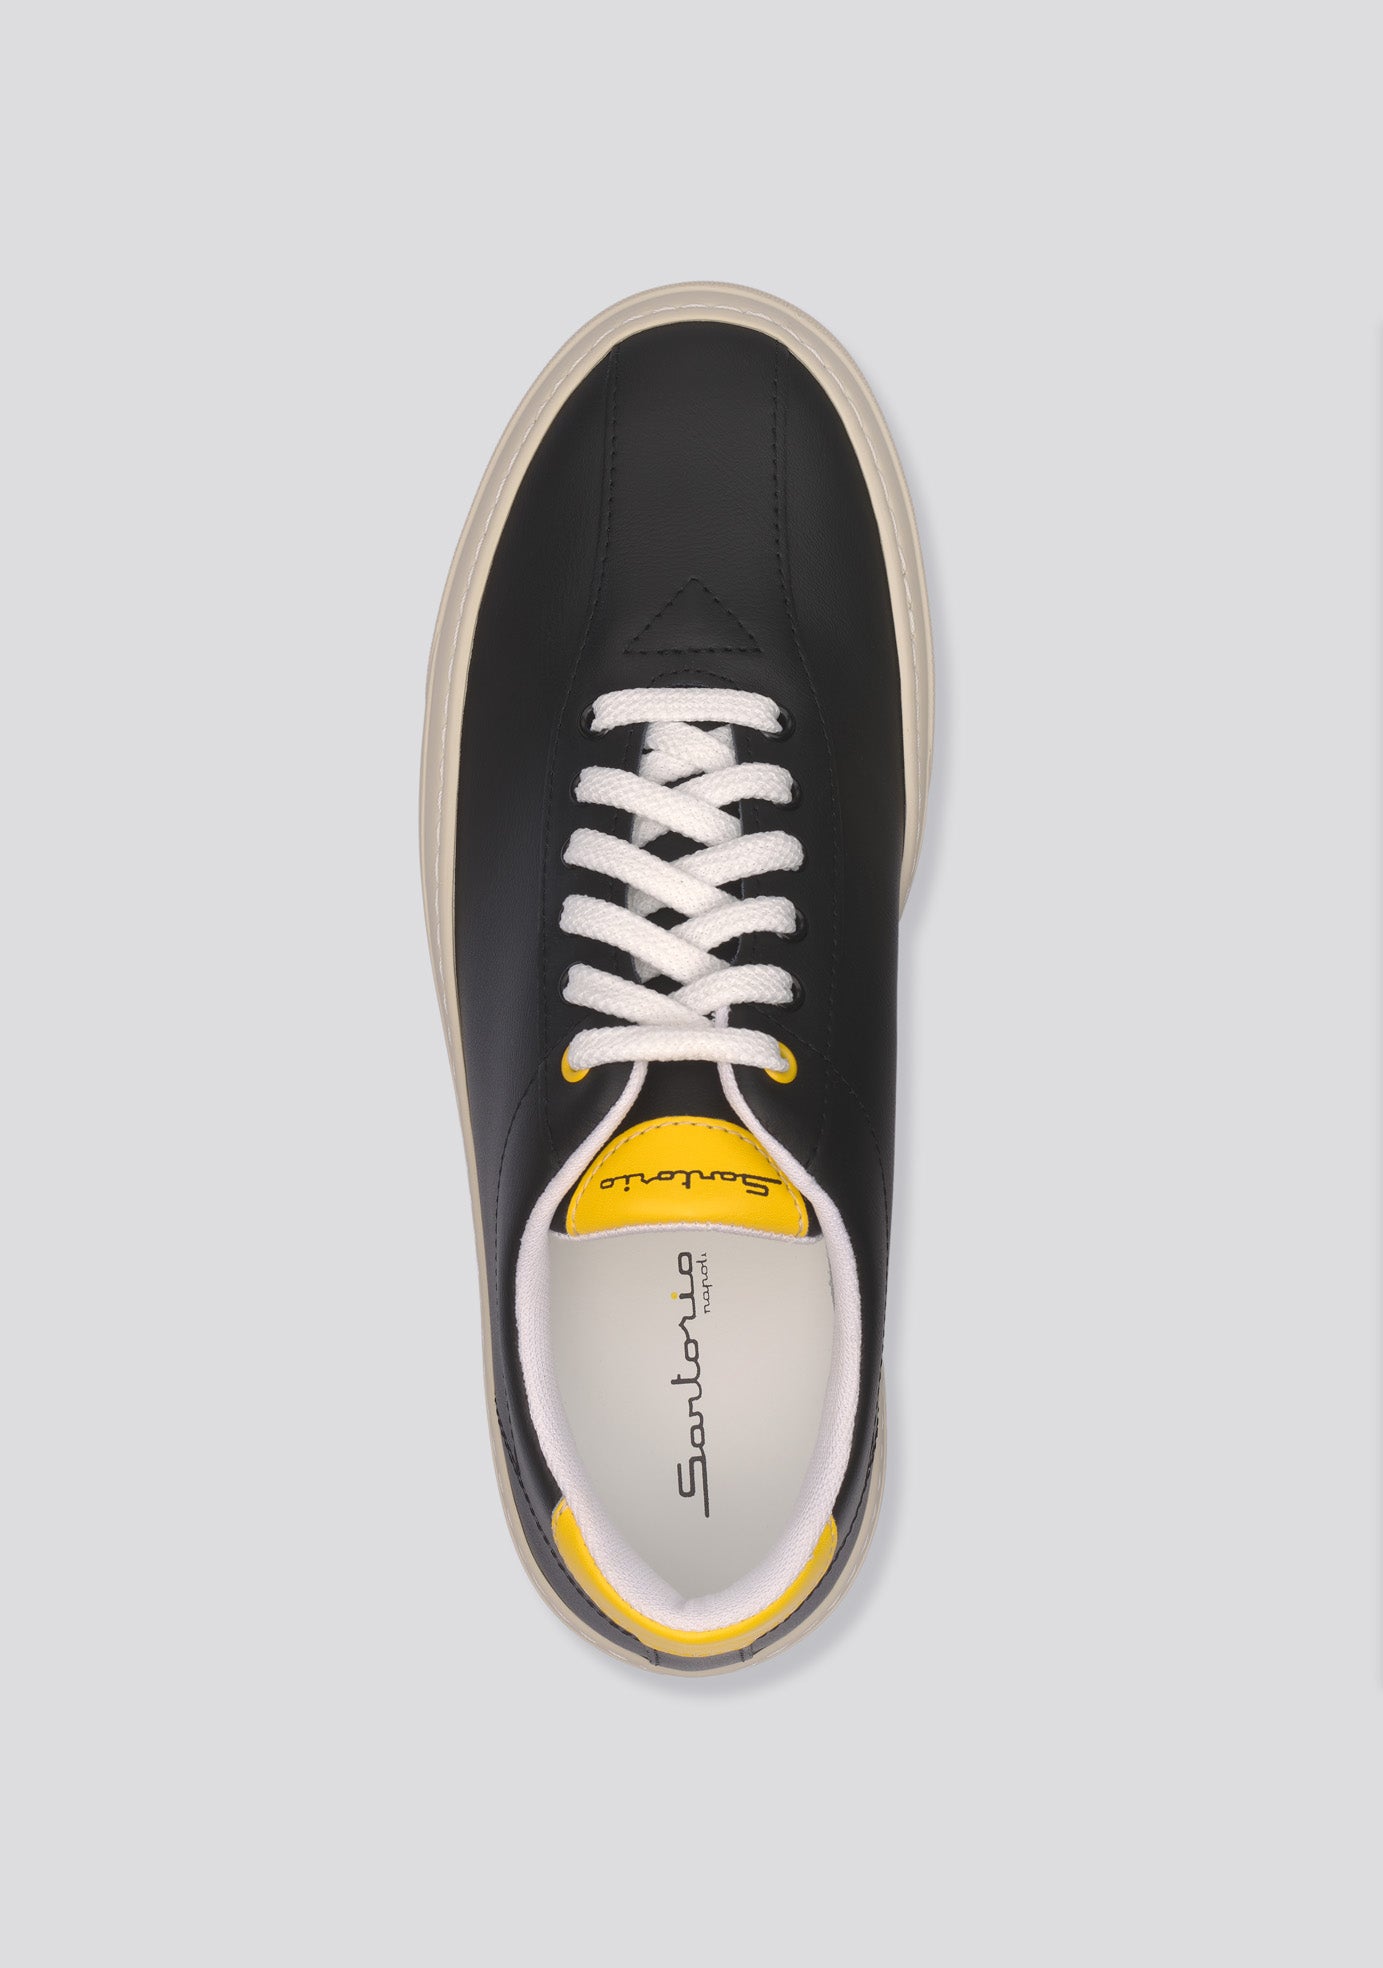 Black Calfskin leather sneakers “Never Give Up”